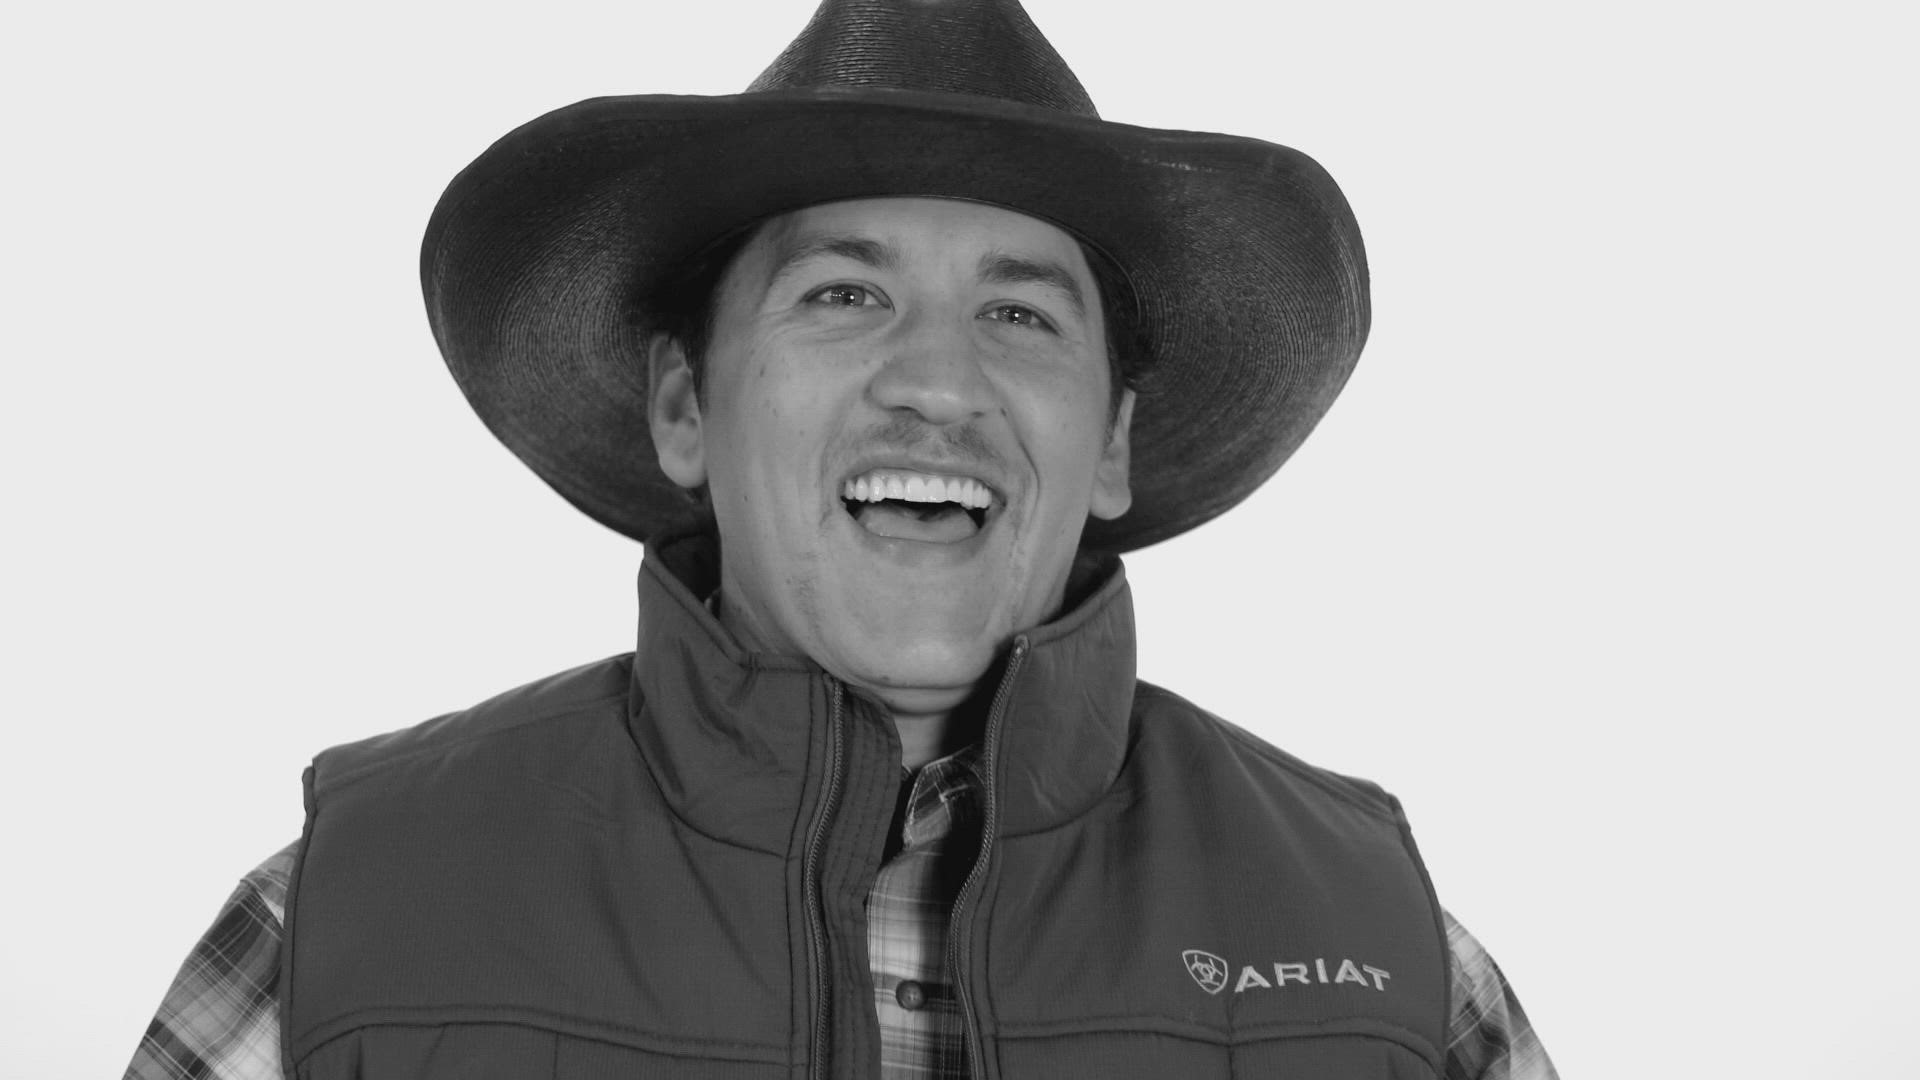 Joshua Loera, also known as the pumpkin cowboy, sits down with Let's Talk.